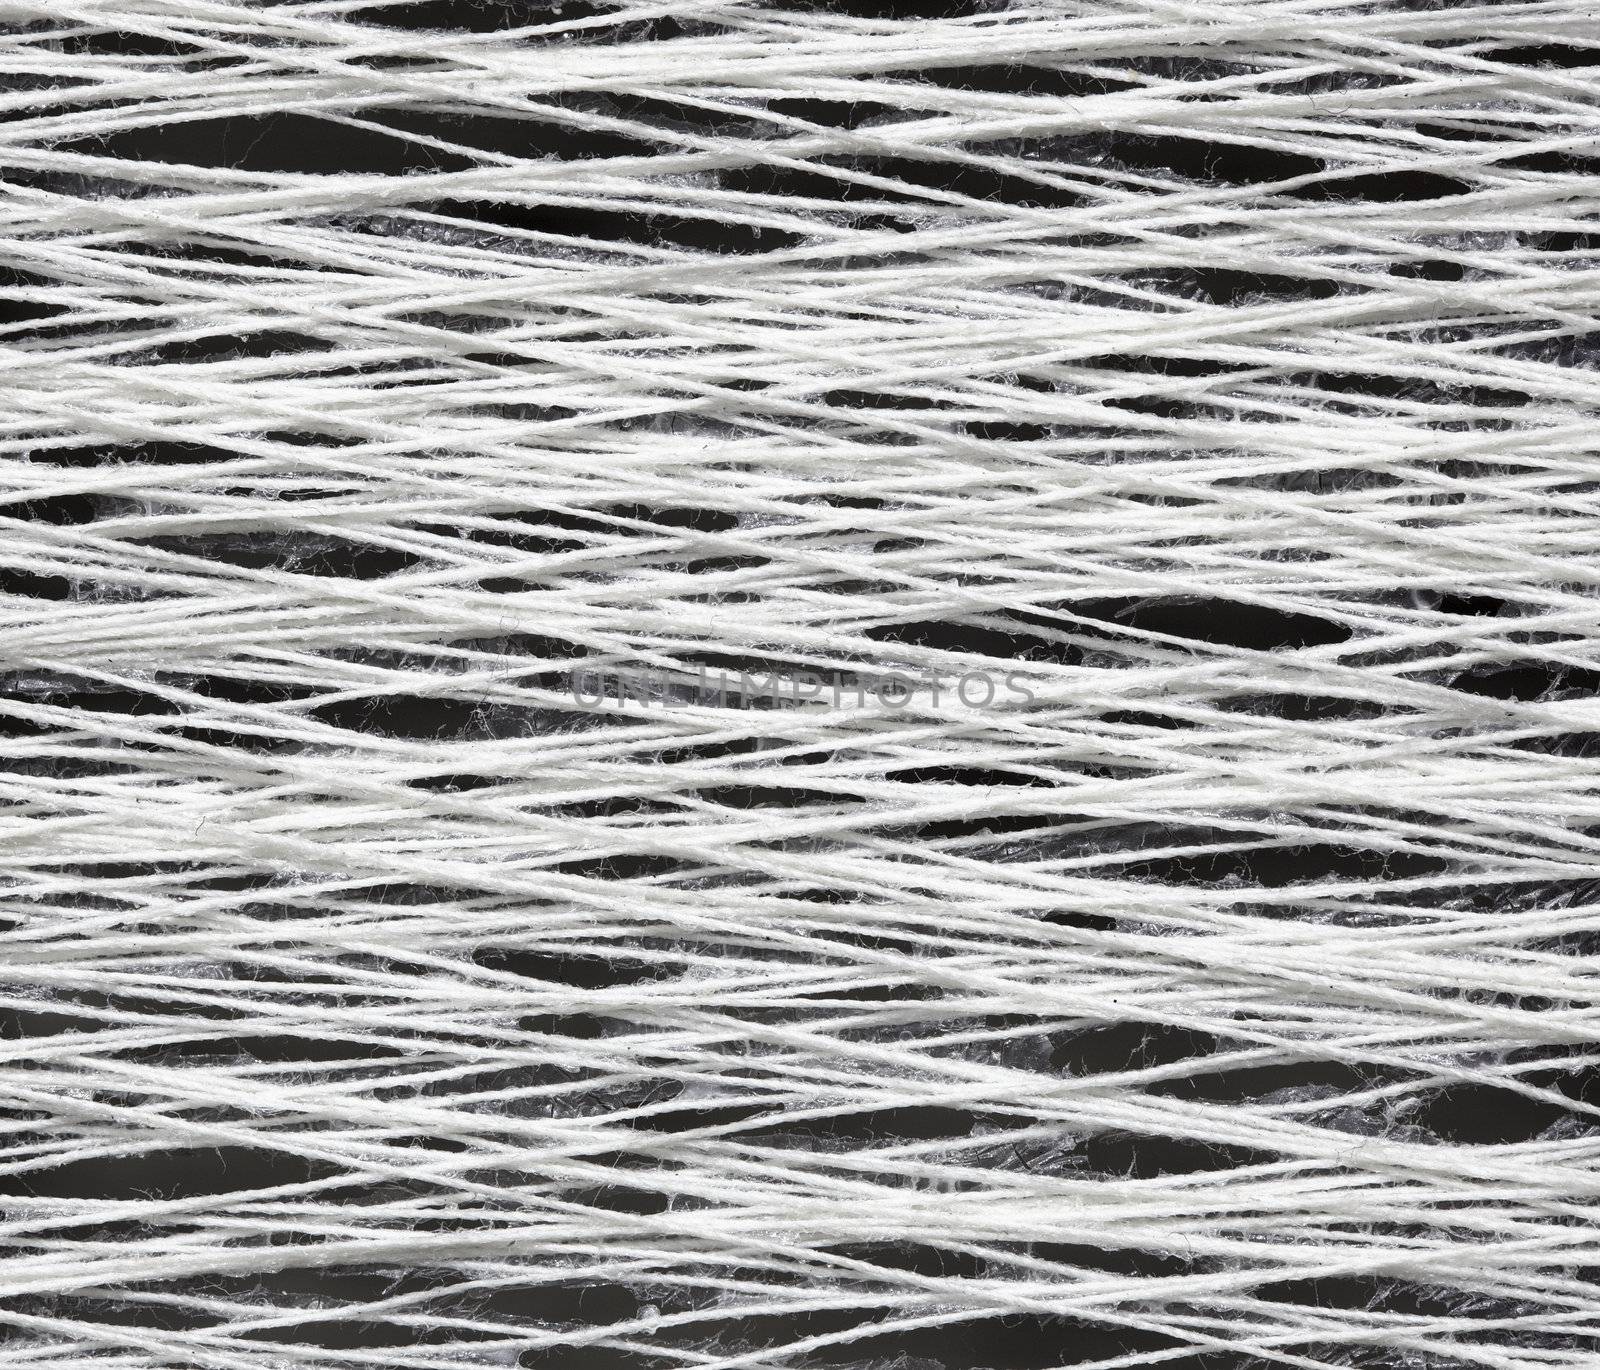 Texture of the yarn with glue by pzaxe